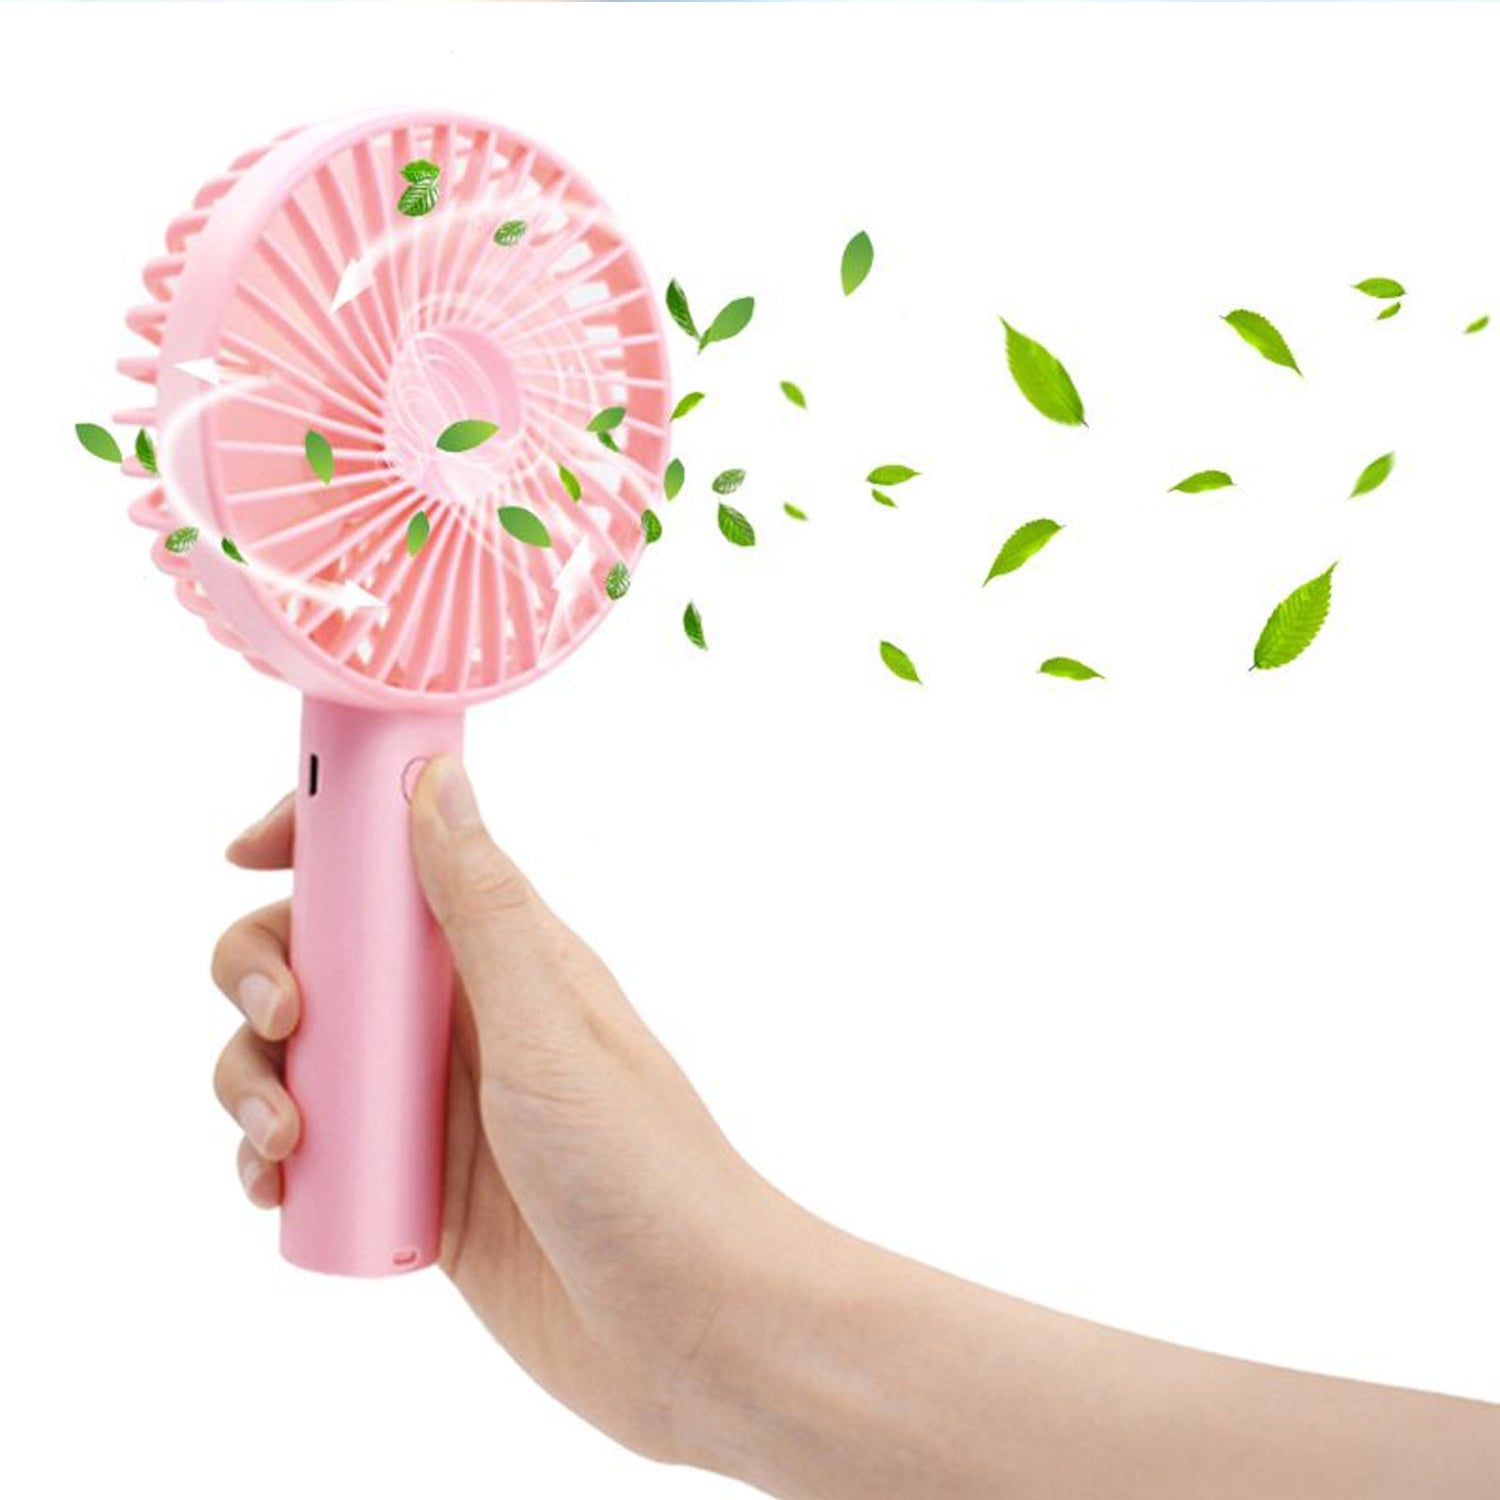 4787 Portable Handheld Fan used in summers in all kinds of places including household and offices etc.